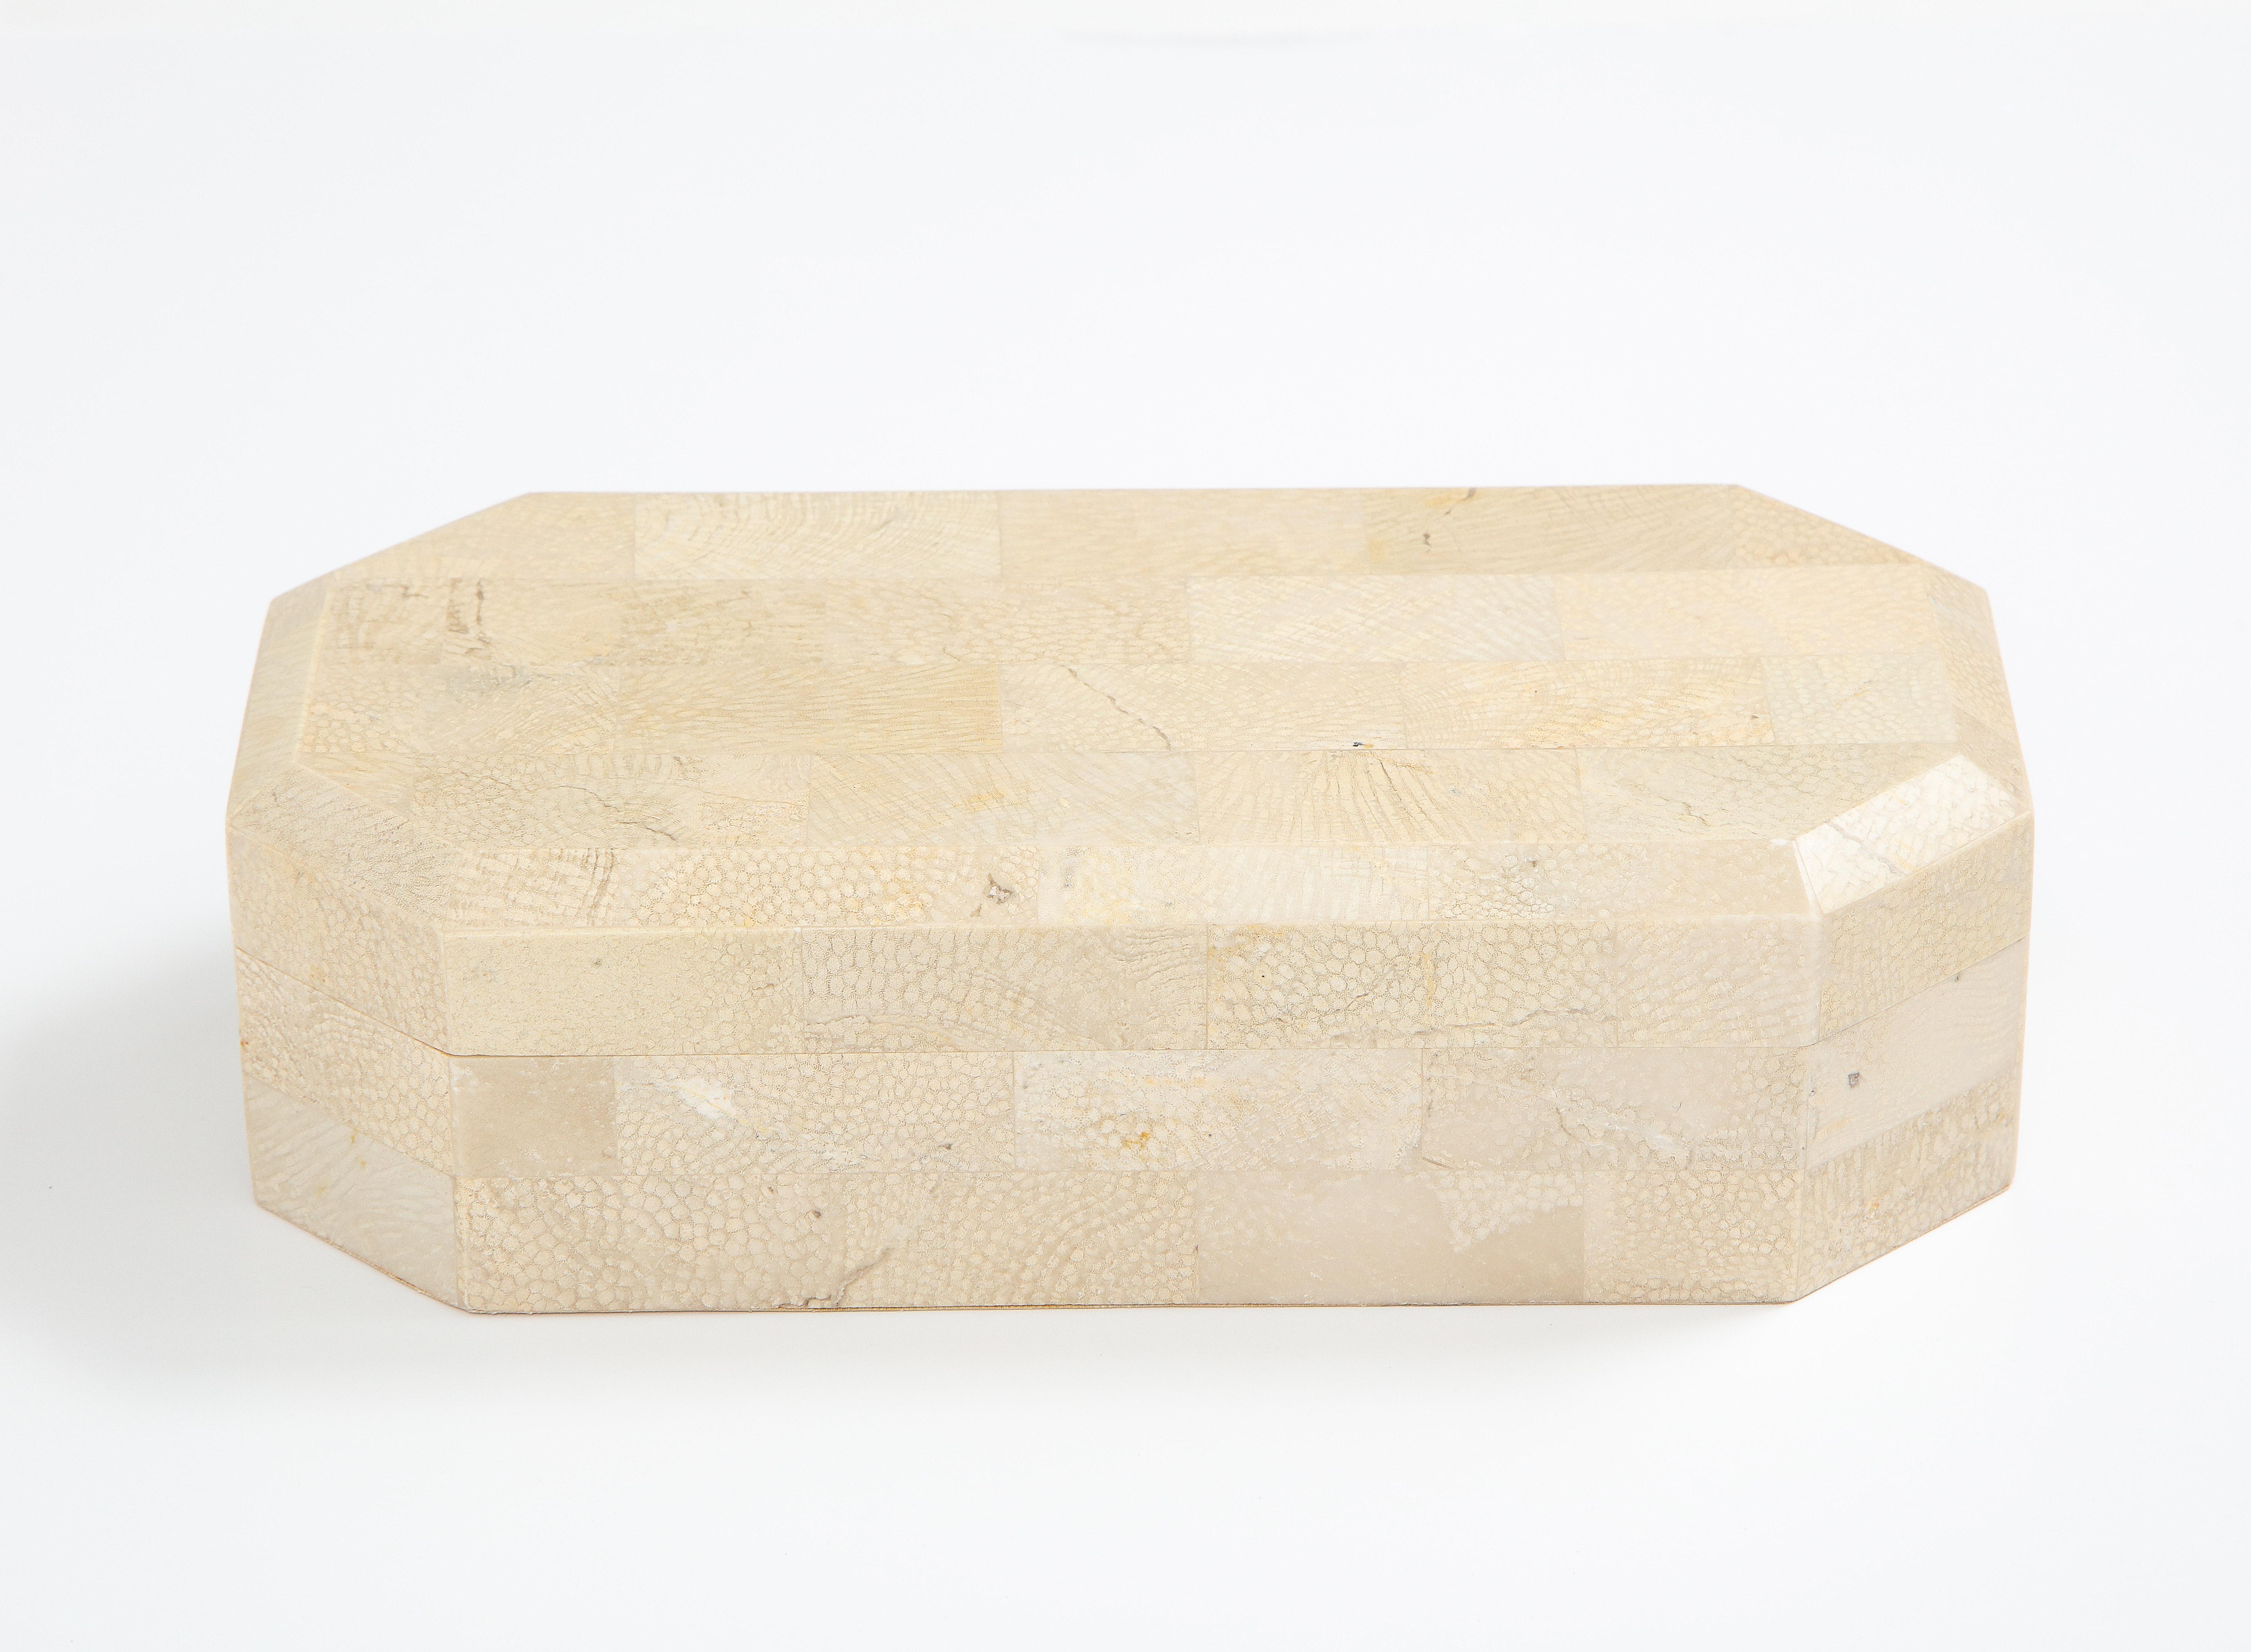 Lovely tessellated marble box in a soft creamy Ivory color.
The interior is lined in suede.